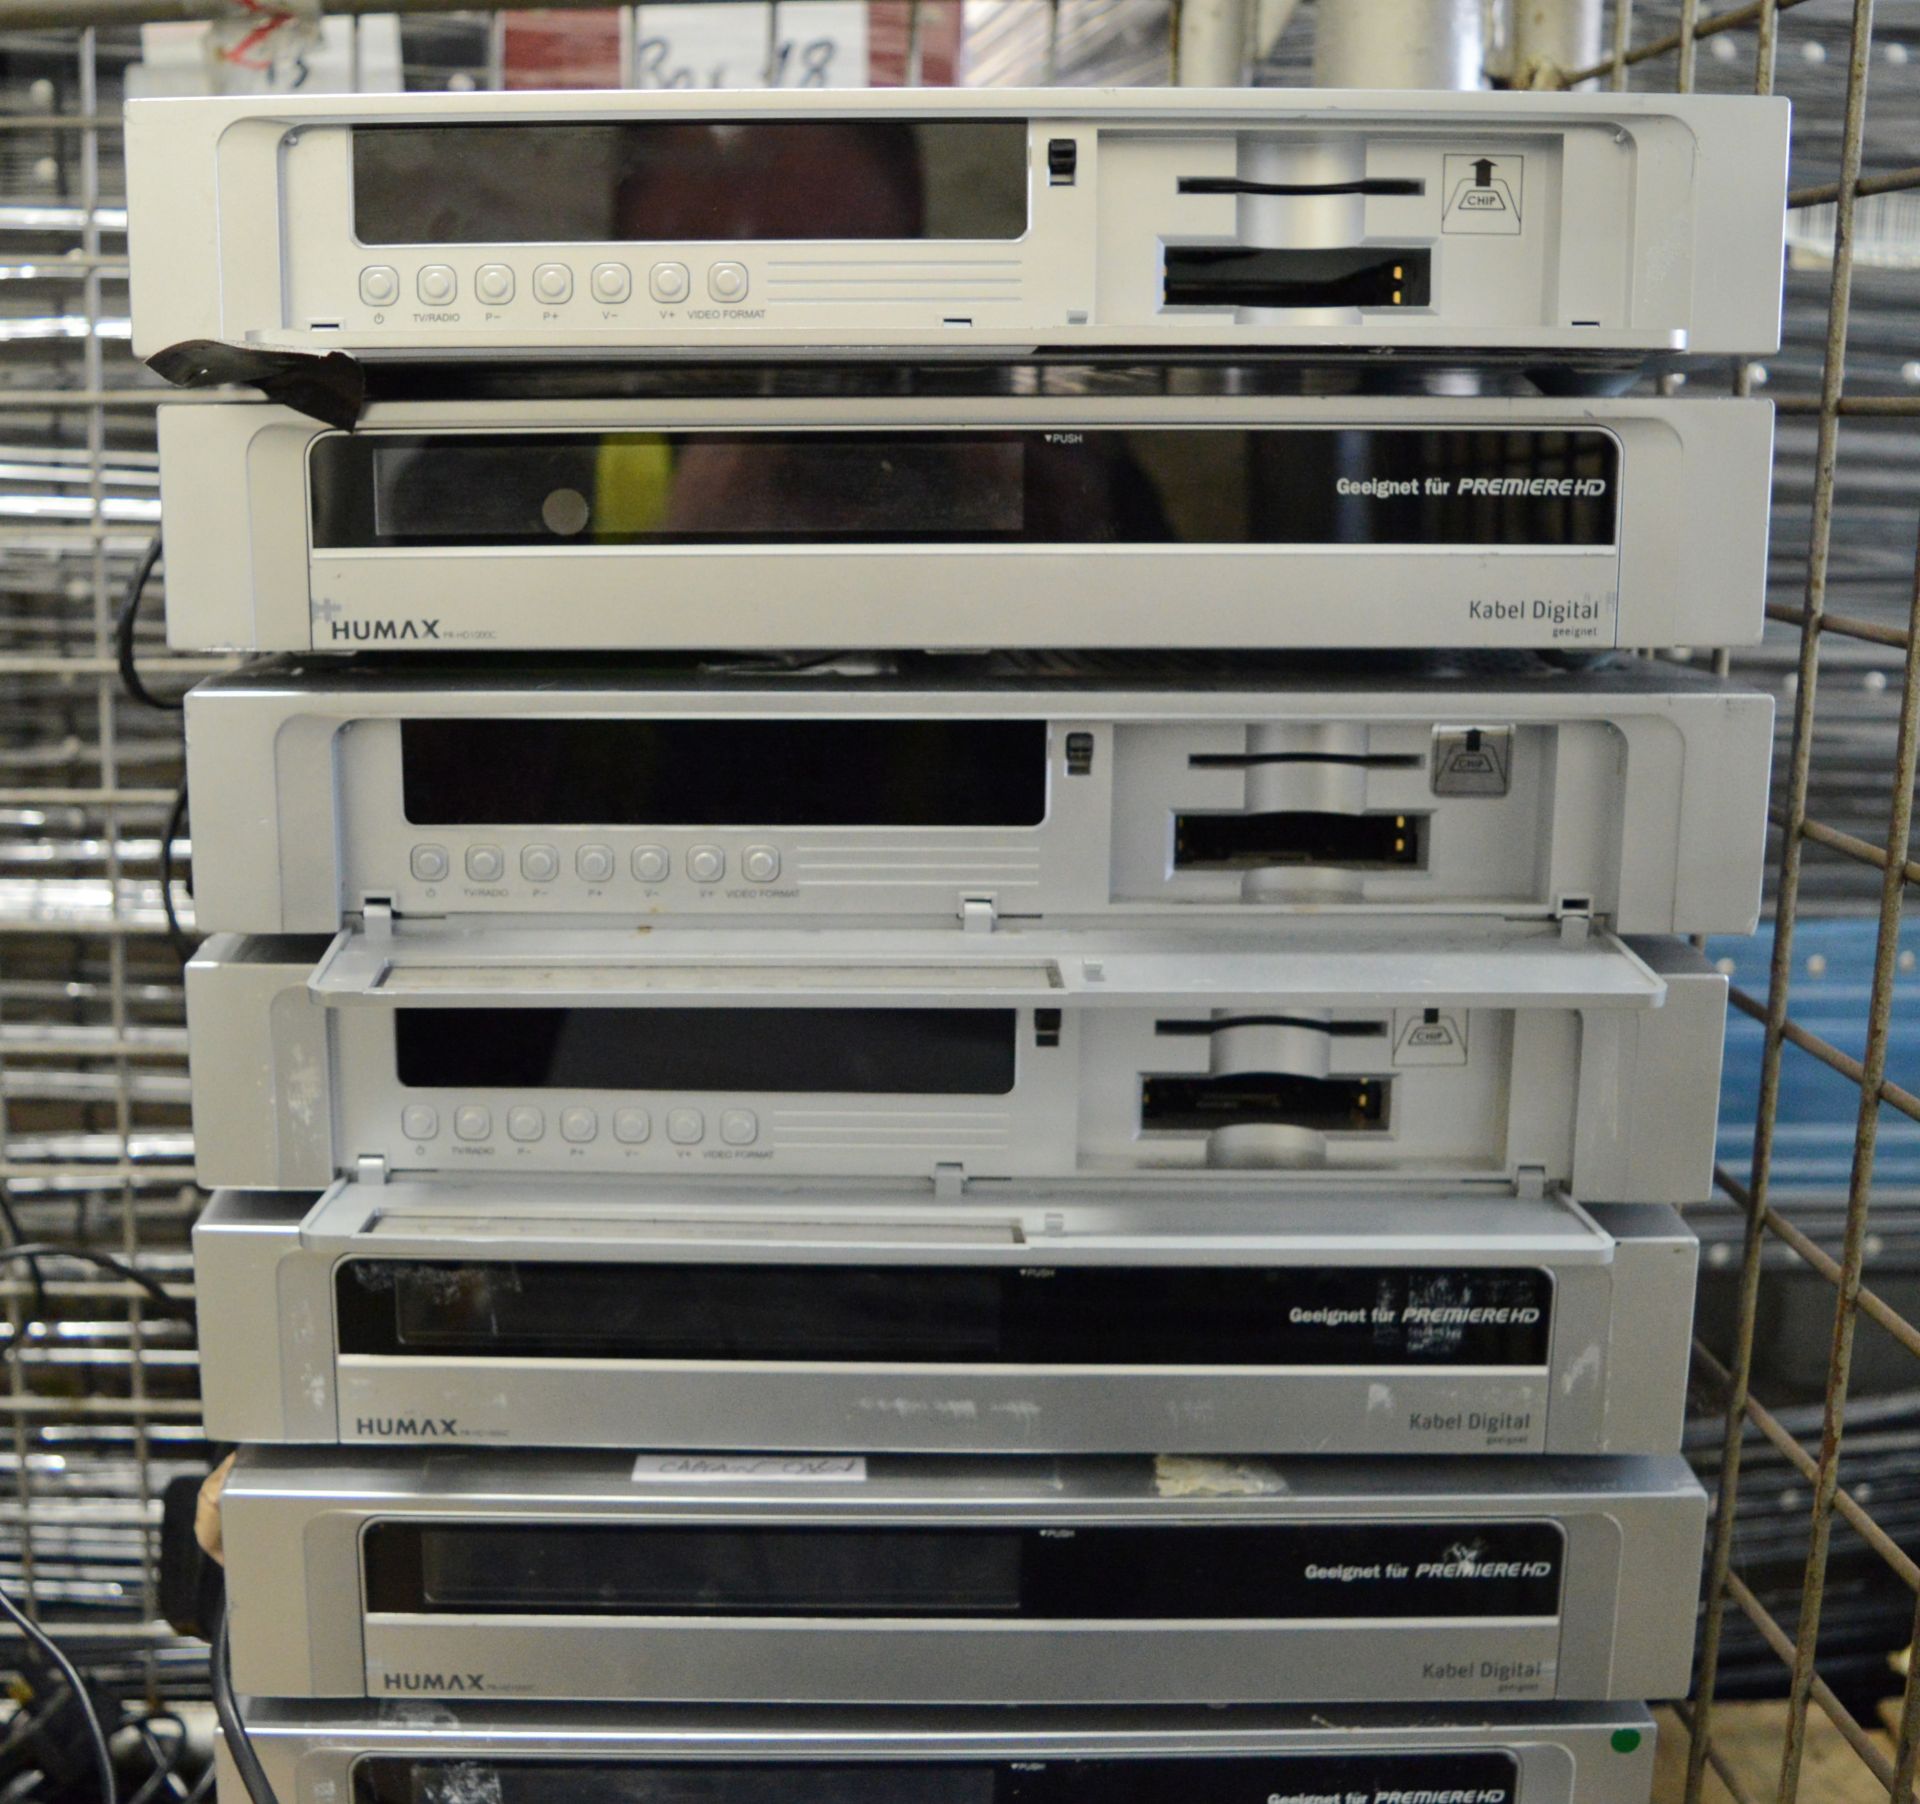 30x Humax PR-HD 1000C Television Receivers. - Image 2 of 2